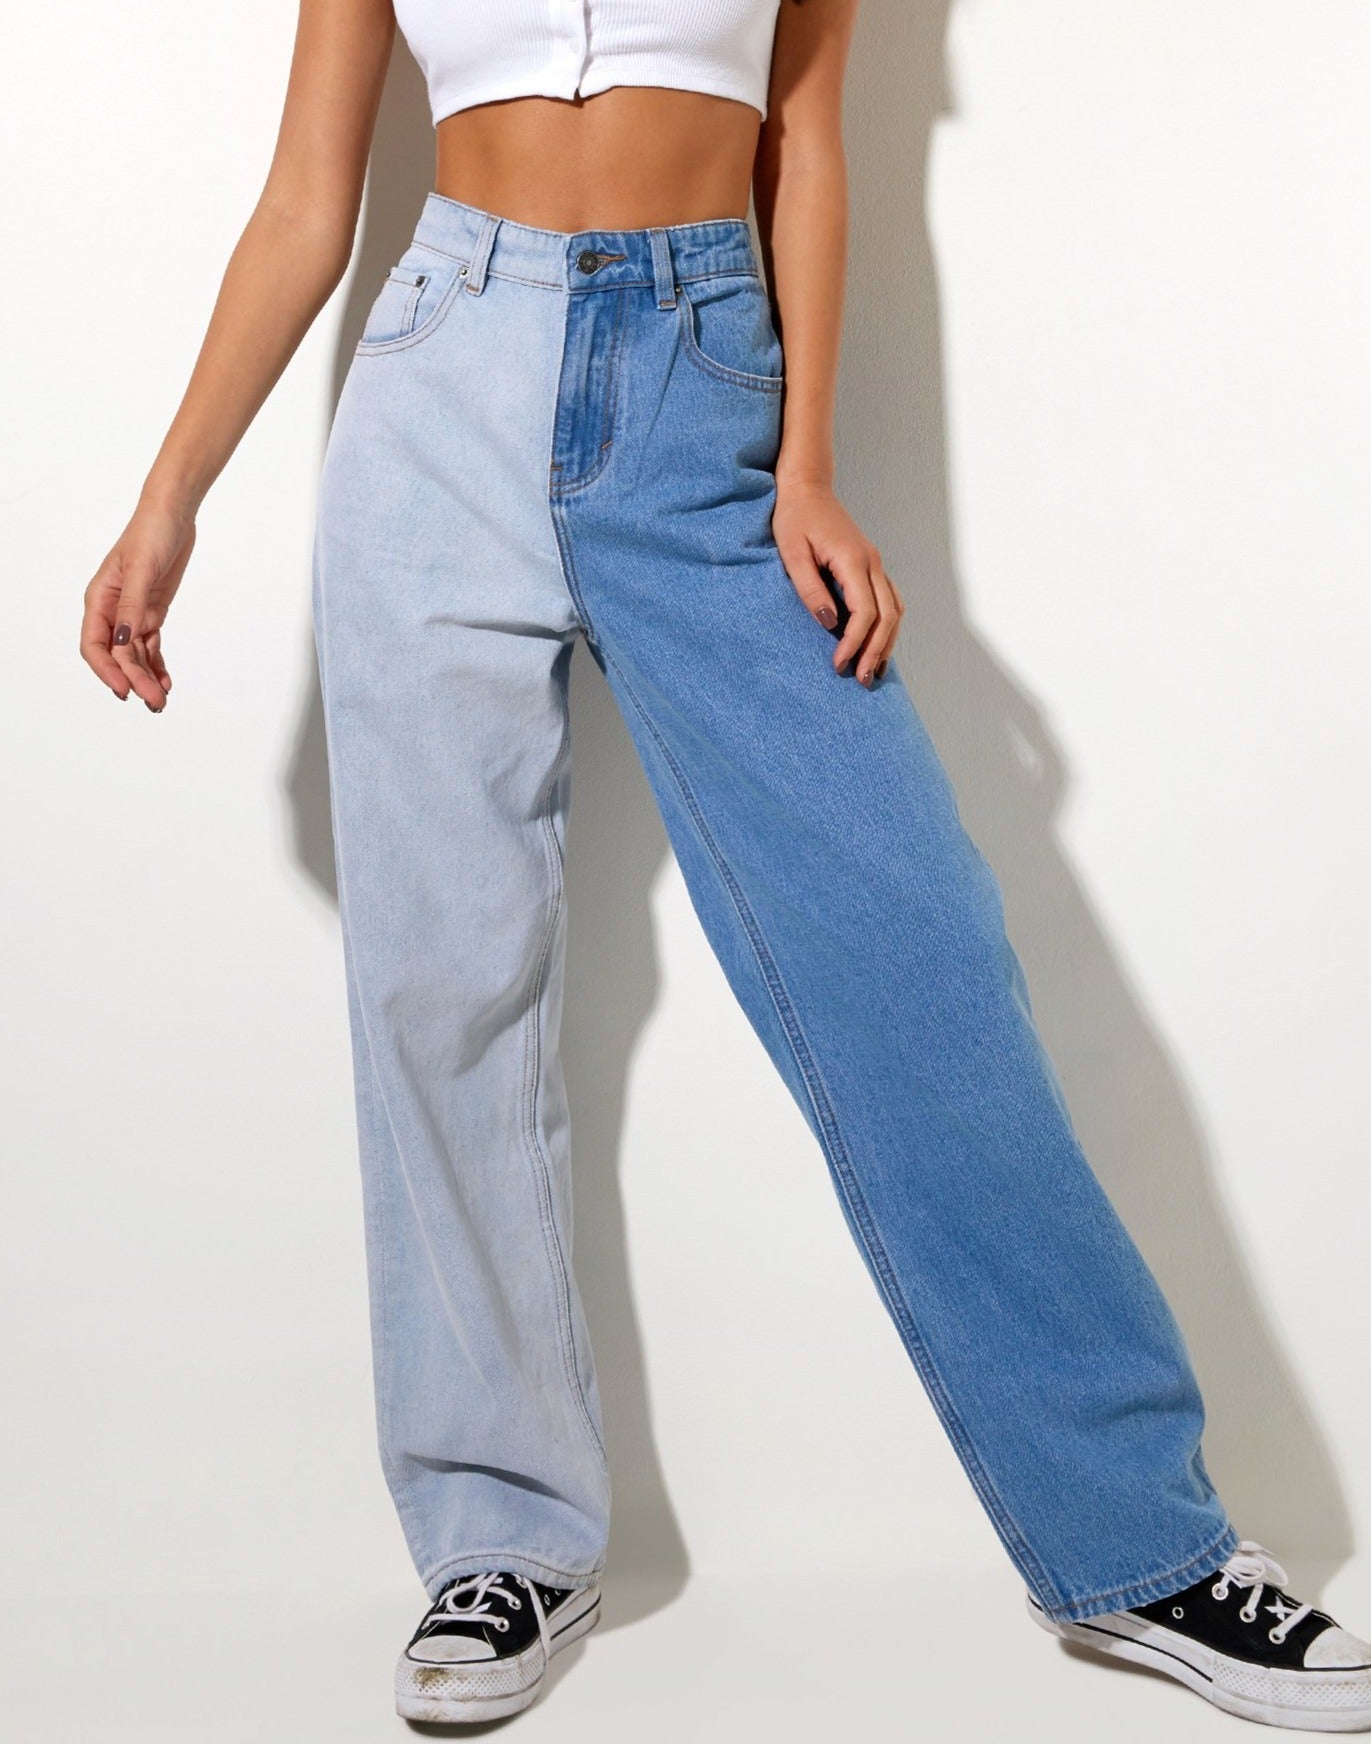 Image of Half and Half Parallel Jean in Light Wash and Bleach Denim